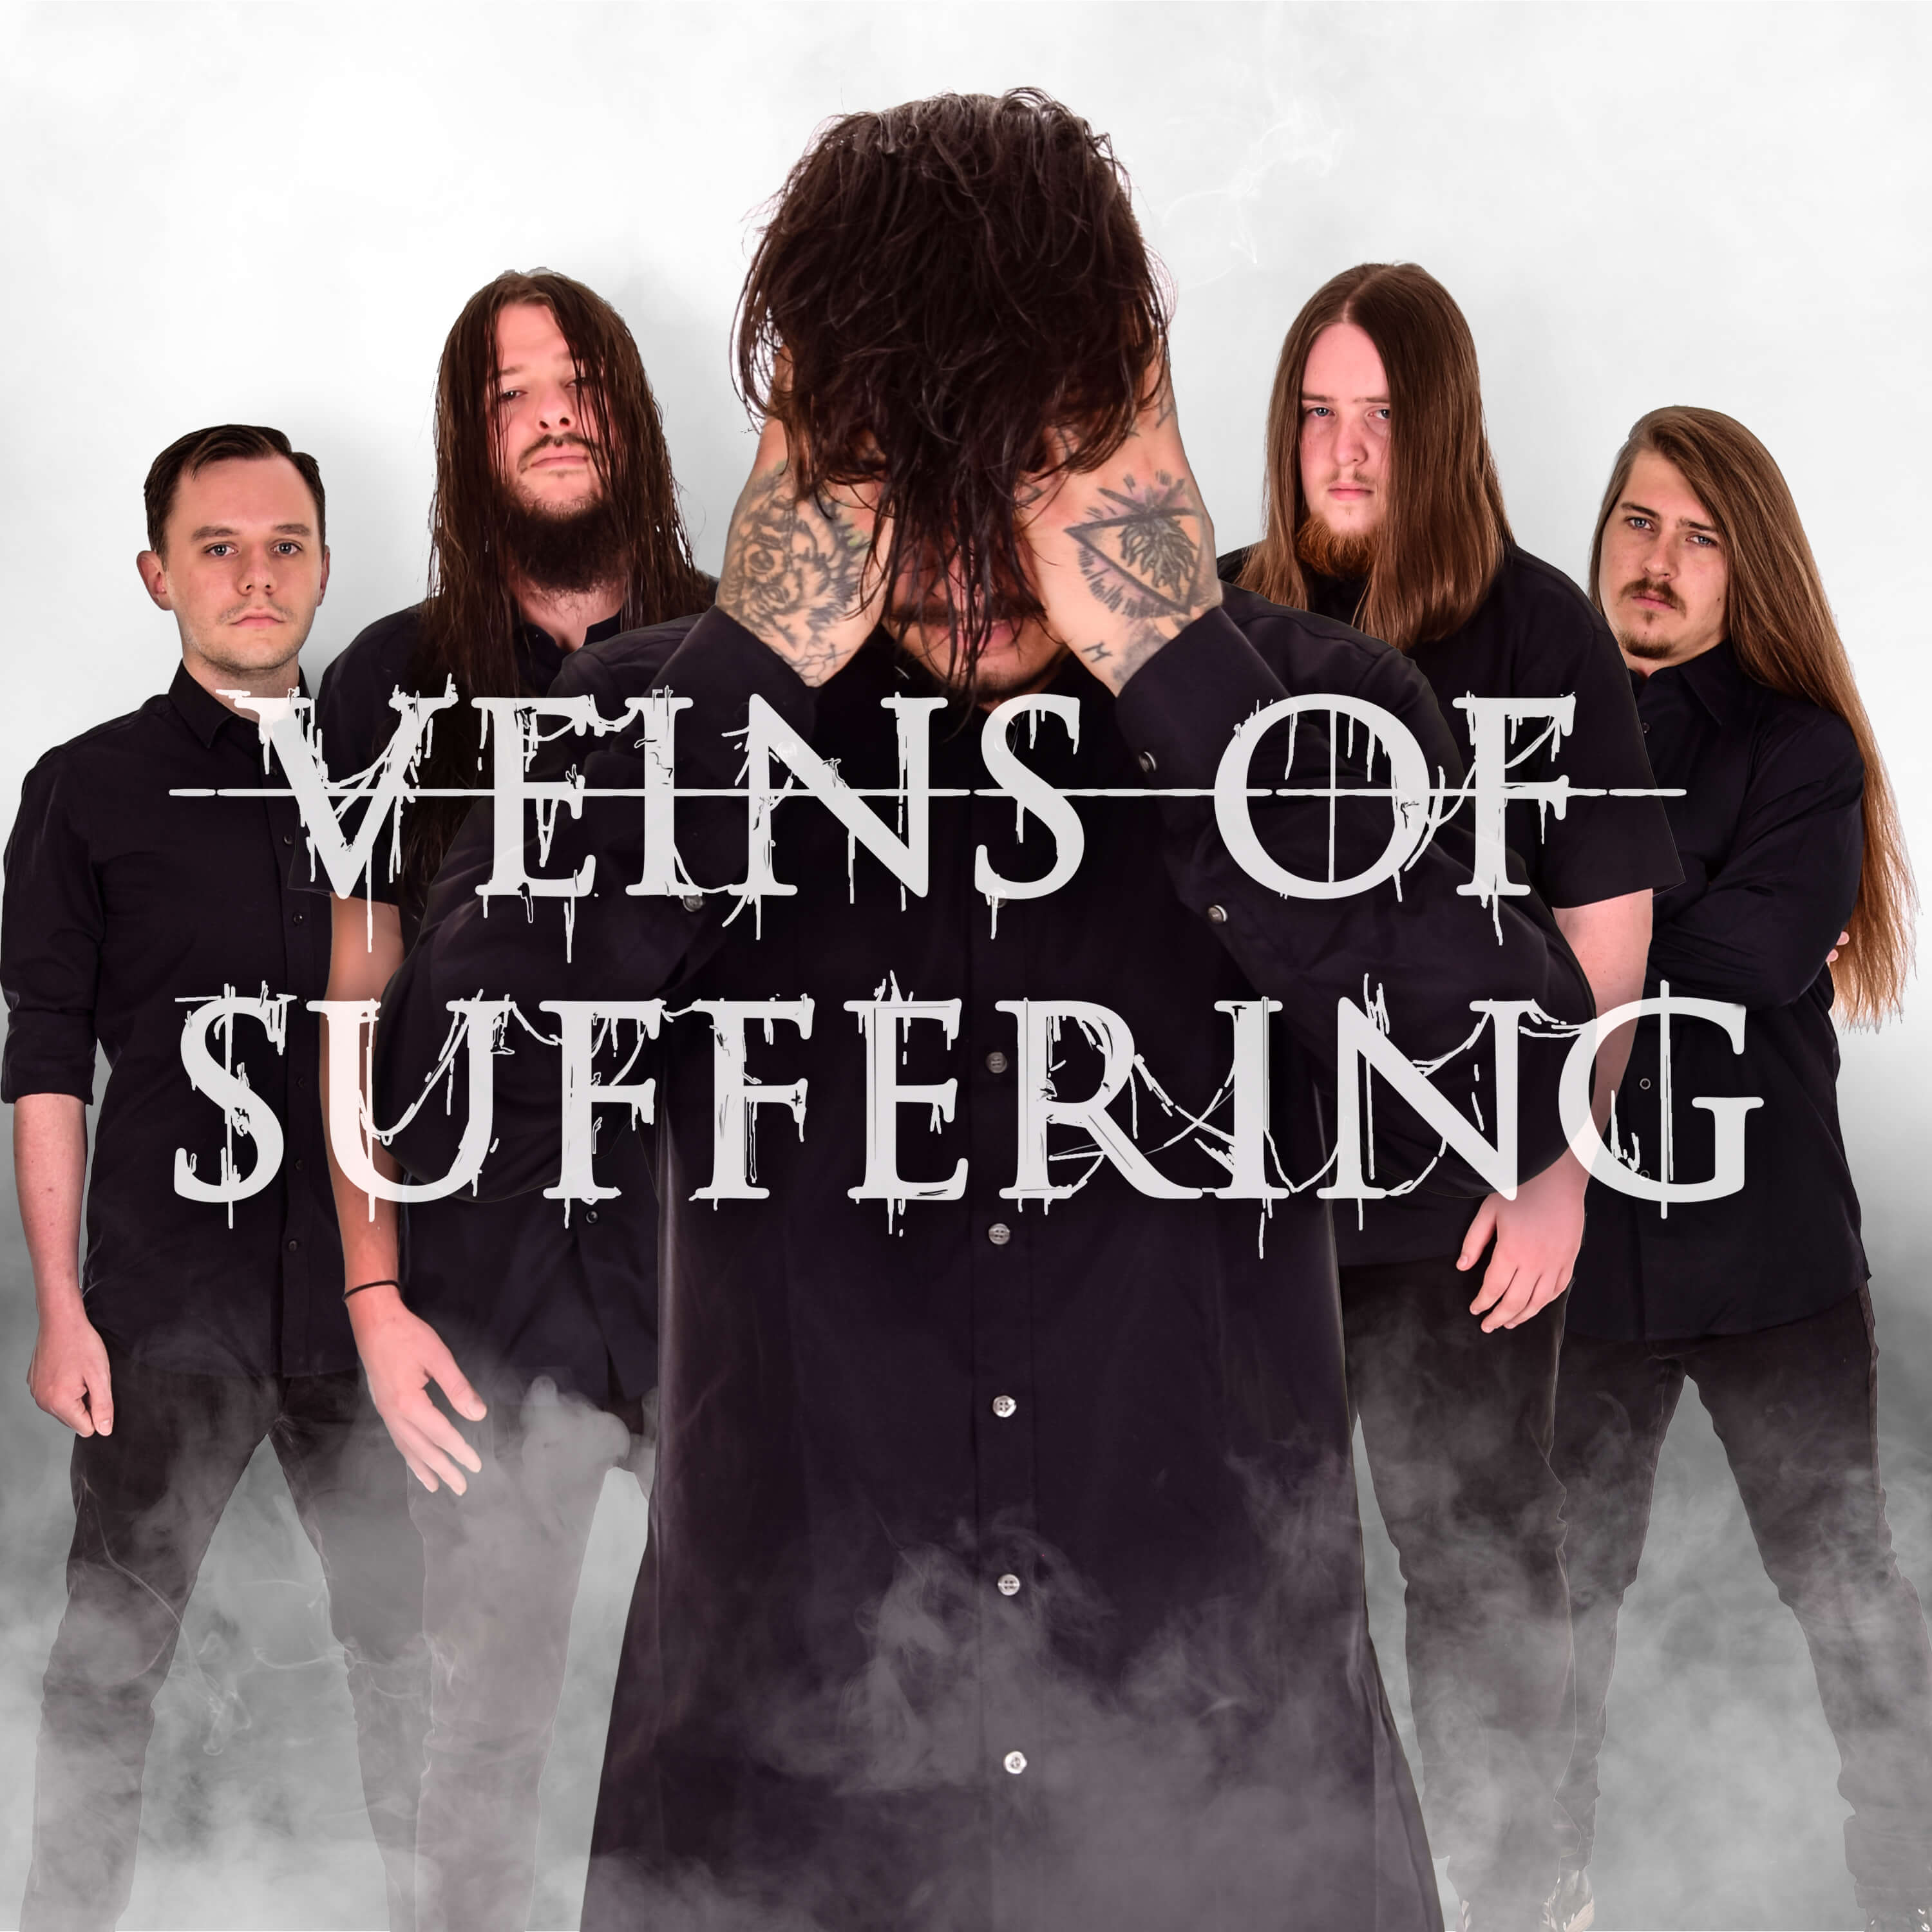 Veins of Suffering band photo